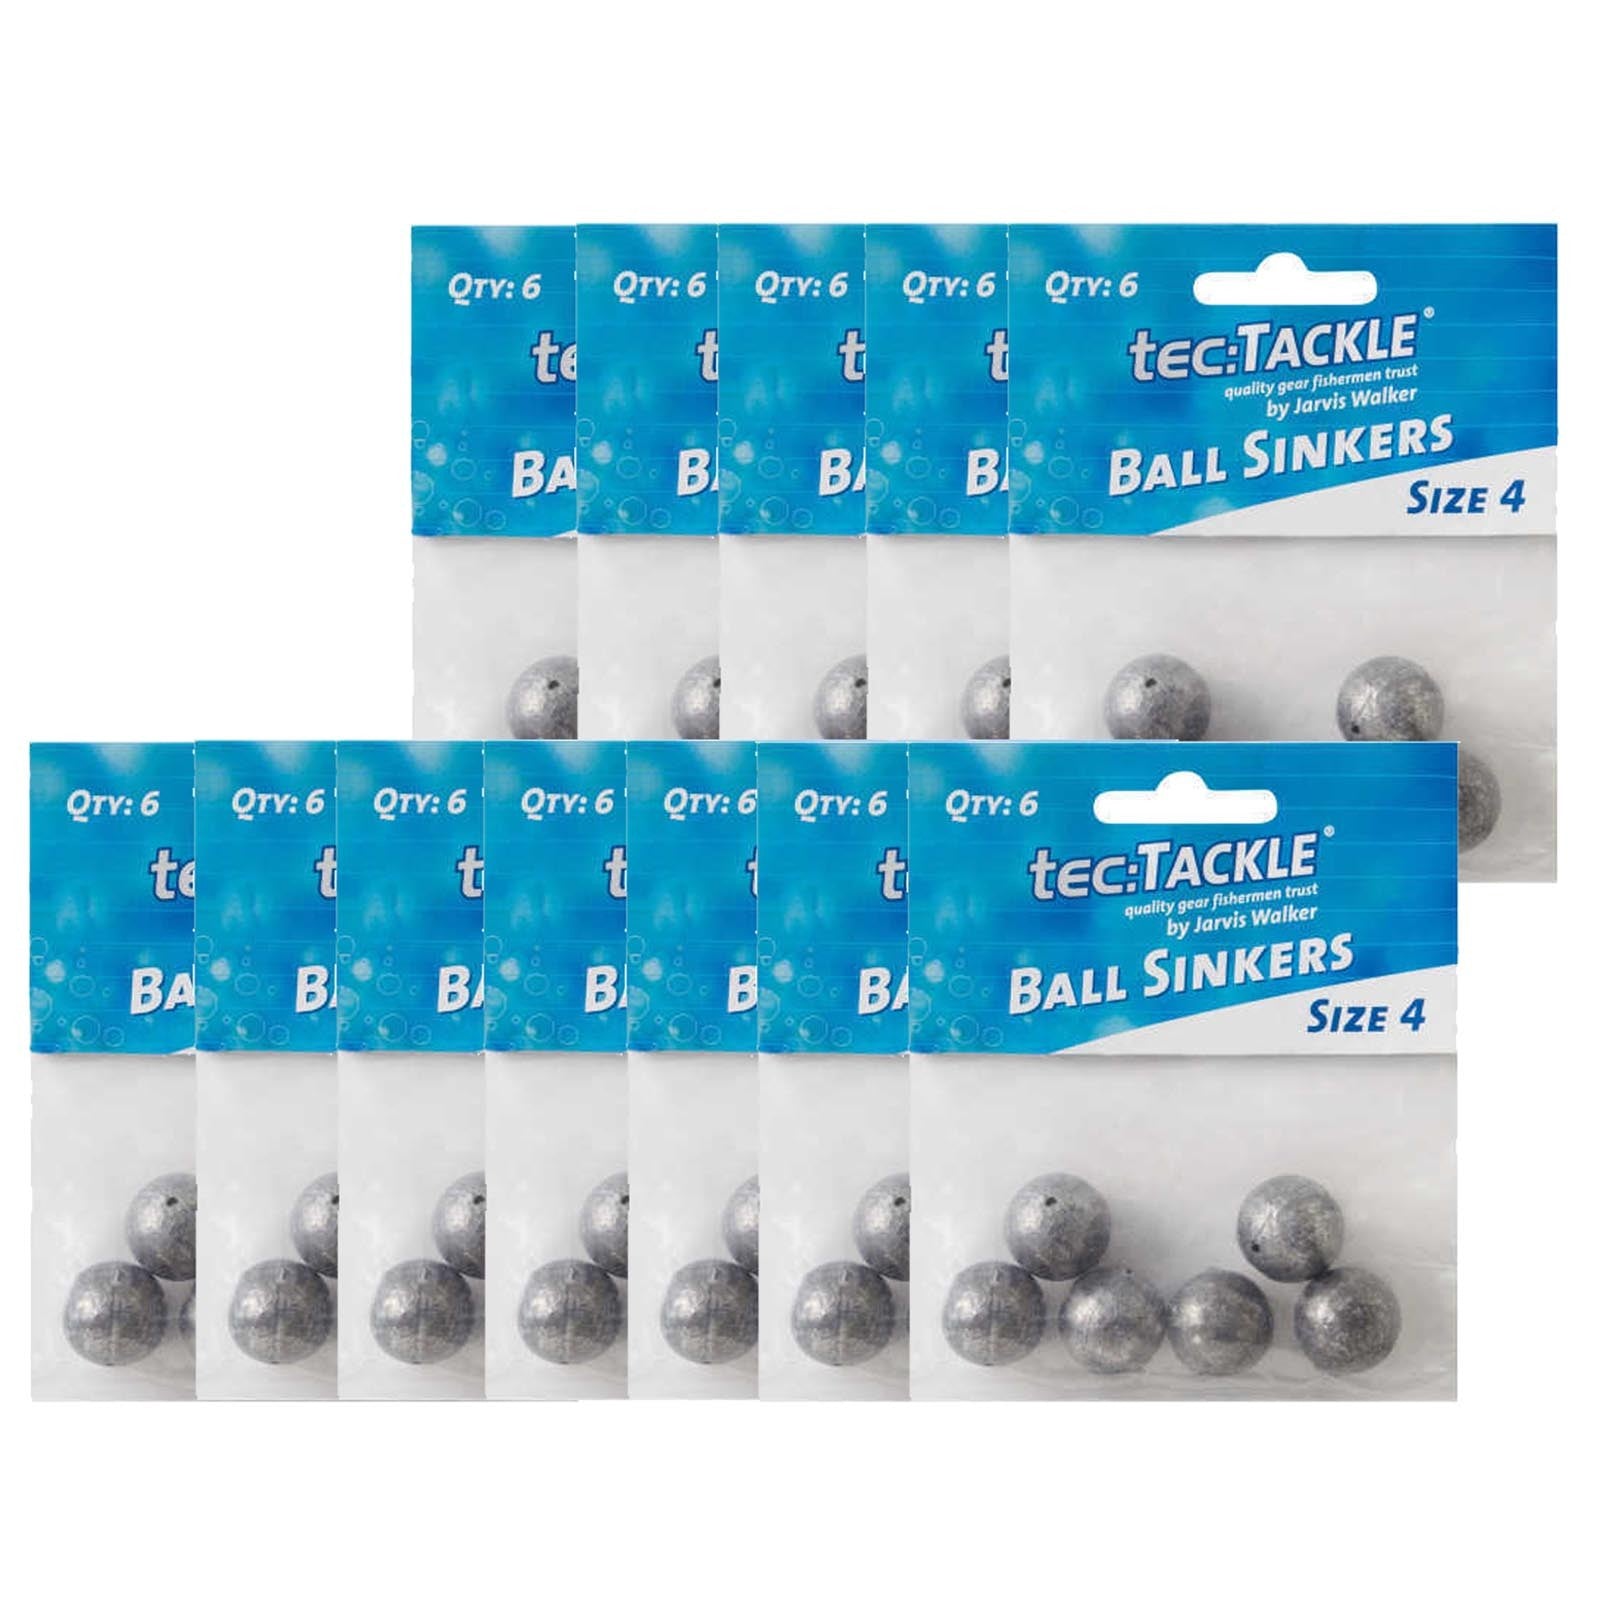 Tec:Tackle Ball Sinker Size 4 Qty 5 -  - Mansfield Hunting & Fishing - Products to prepare for Corona Virus